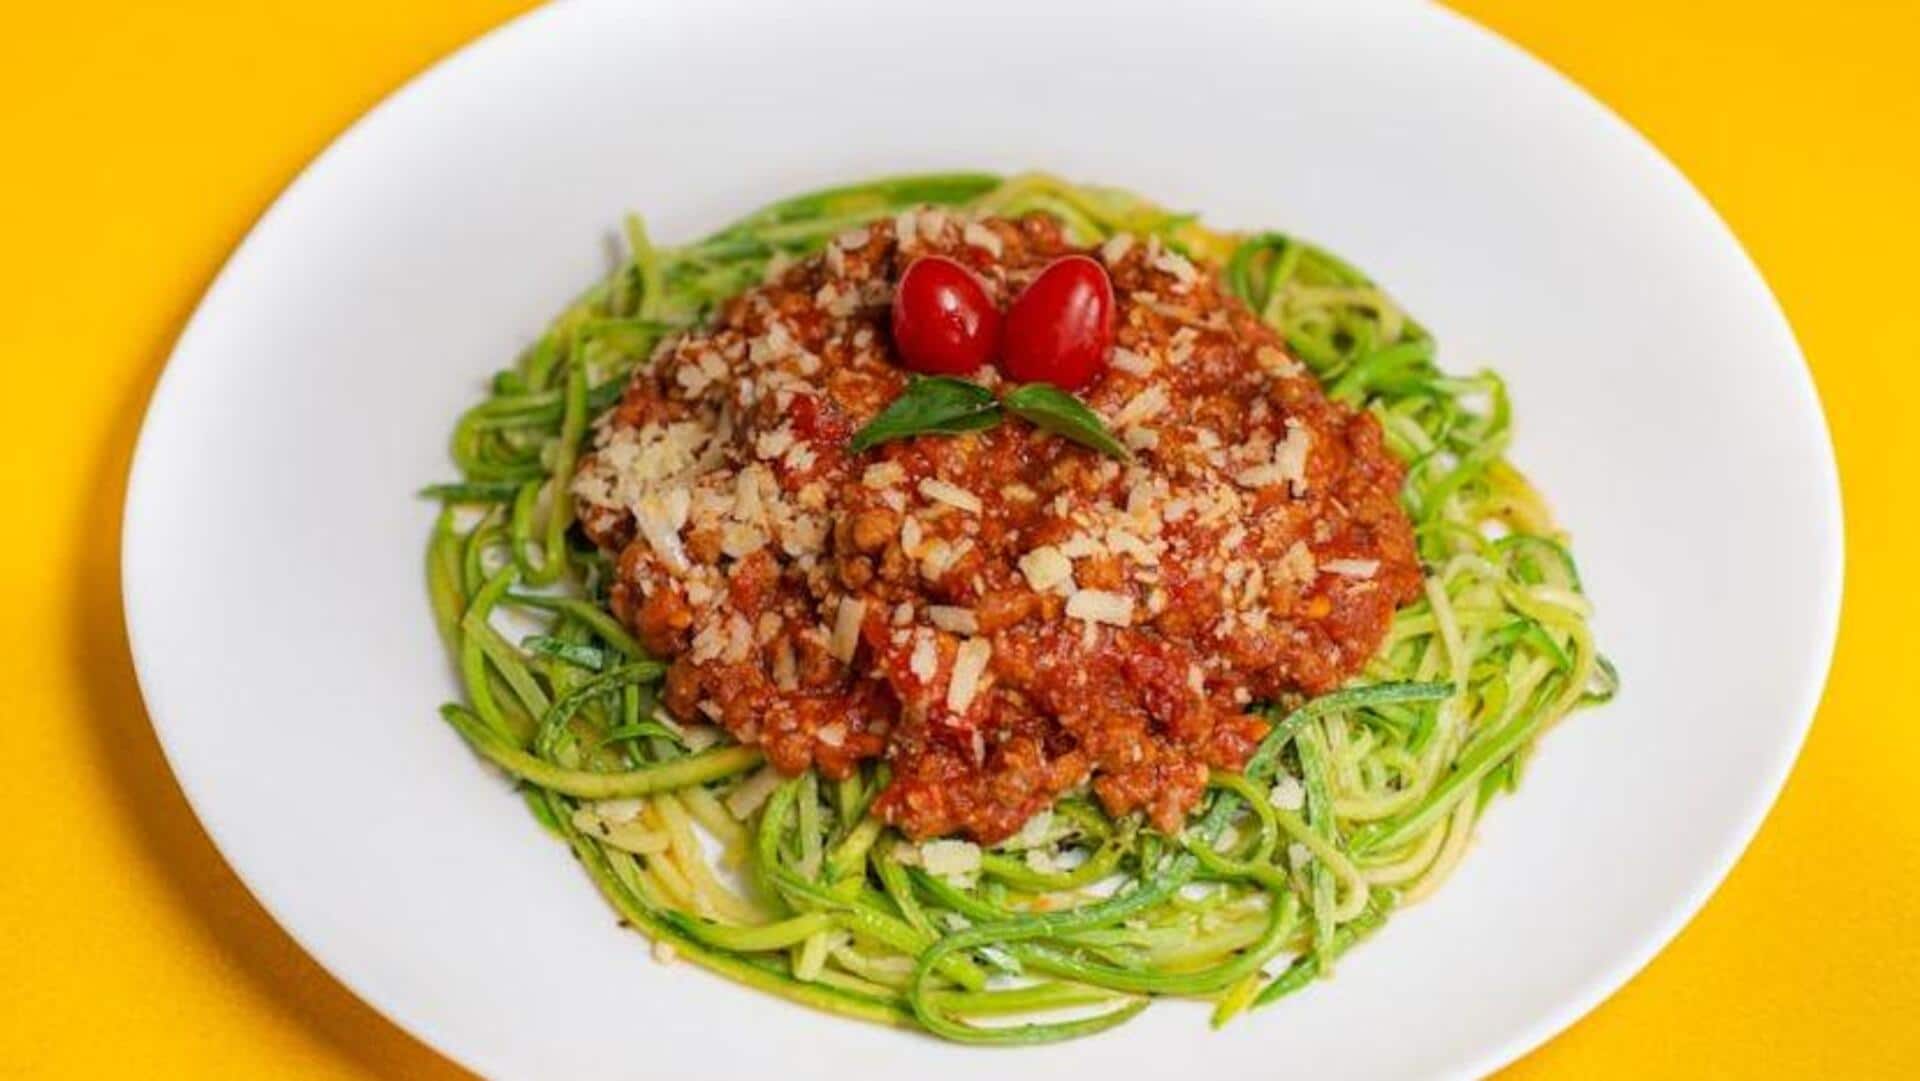 Gorge on these zesty zucchini pasta creations